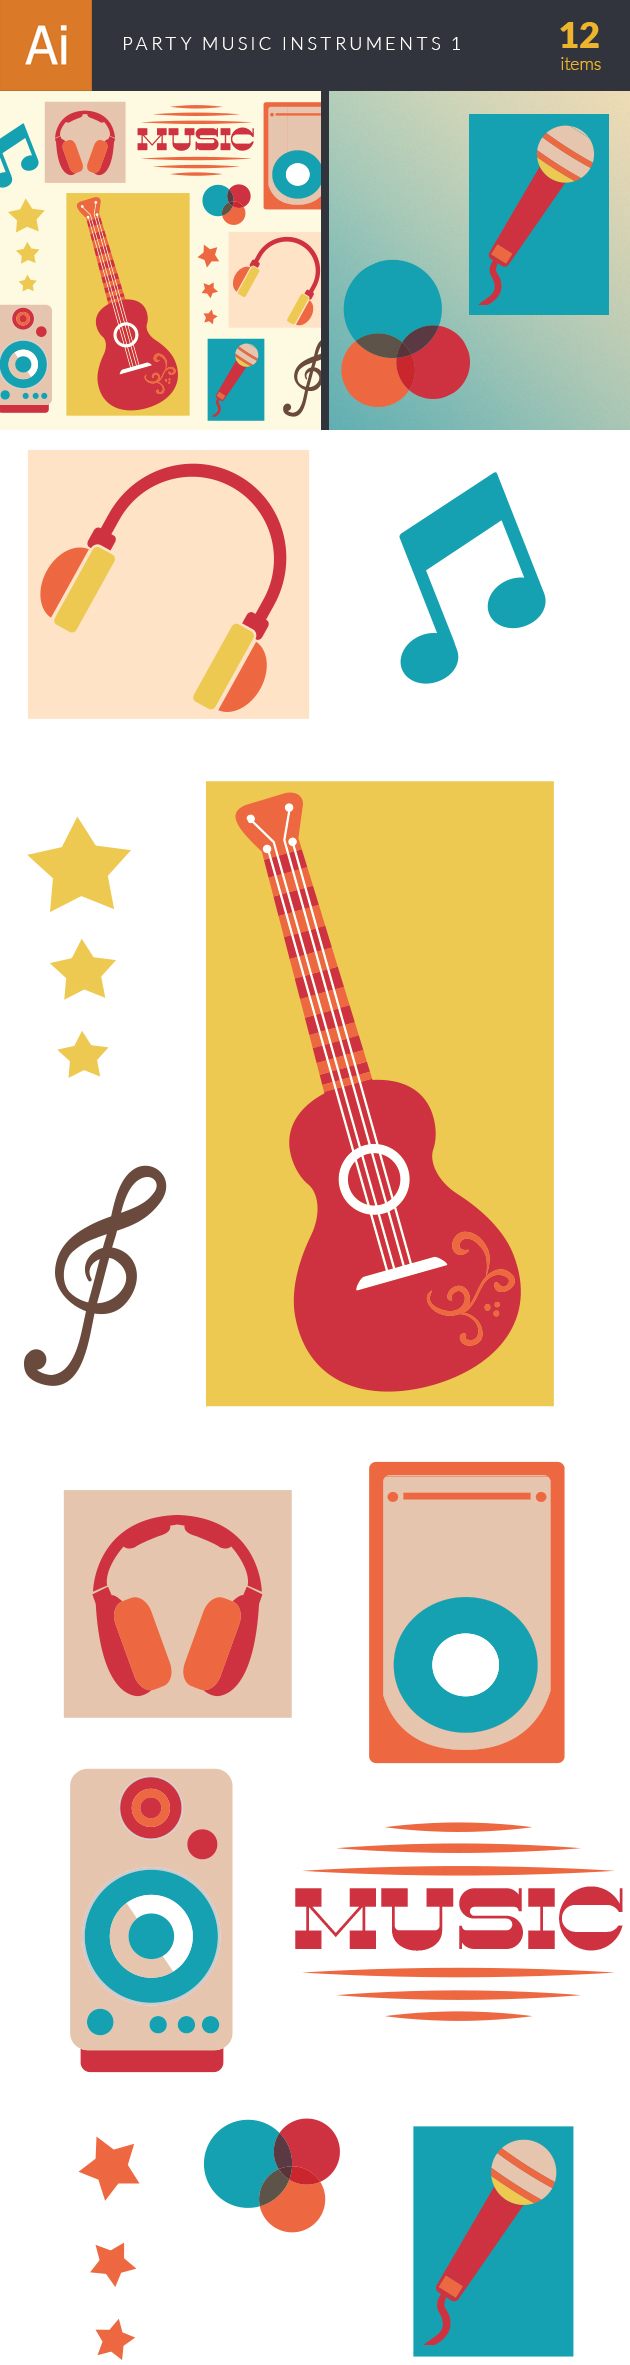 Party Music Instruments Vector Set 1 37